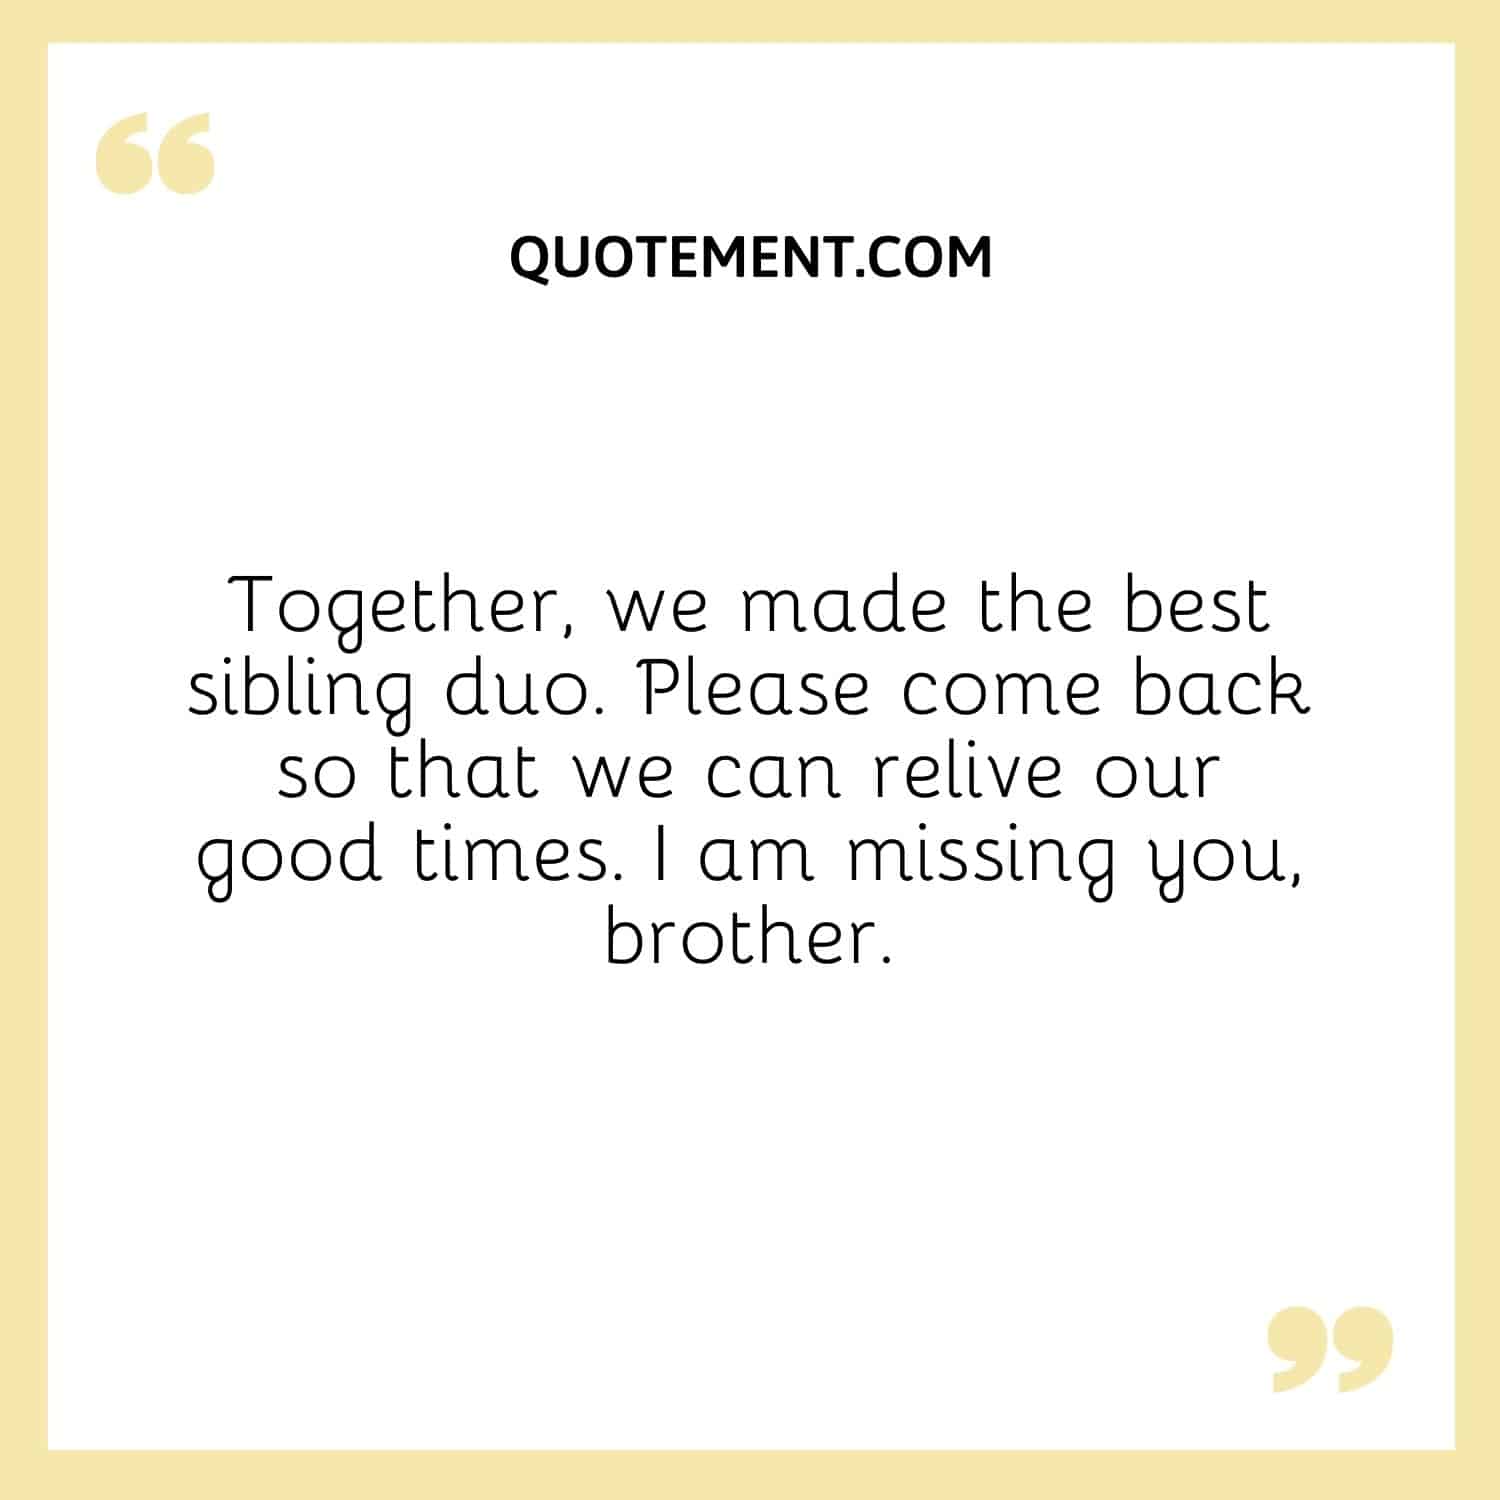 Together, we made the best sibling duo. Please come back so that we can relive our good times. I am missing you, brother.